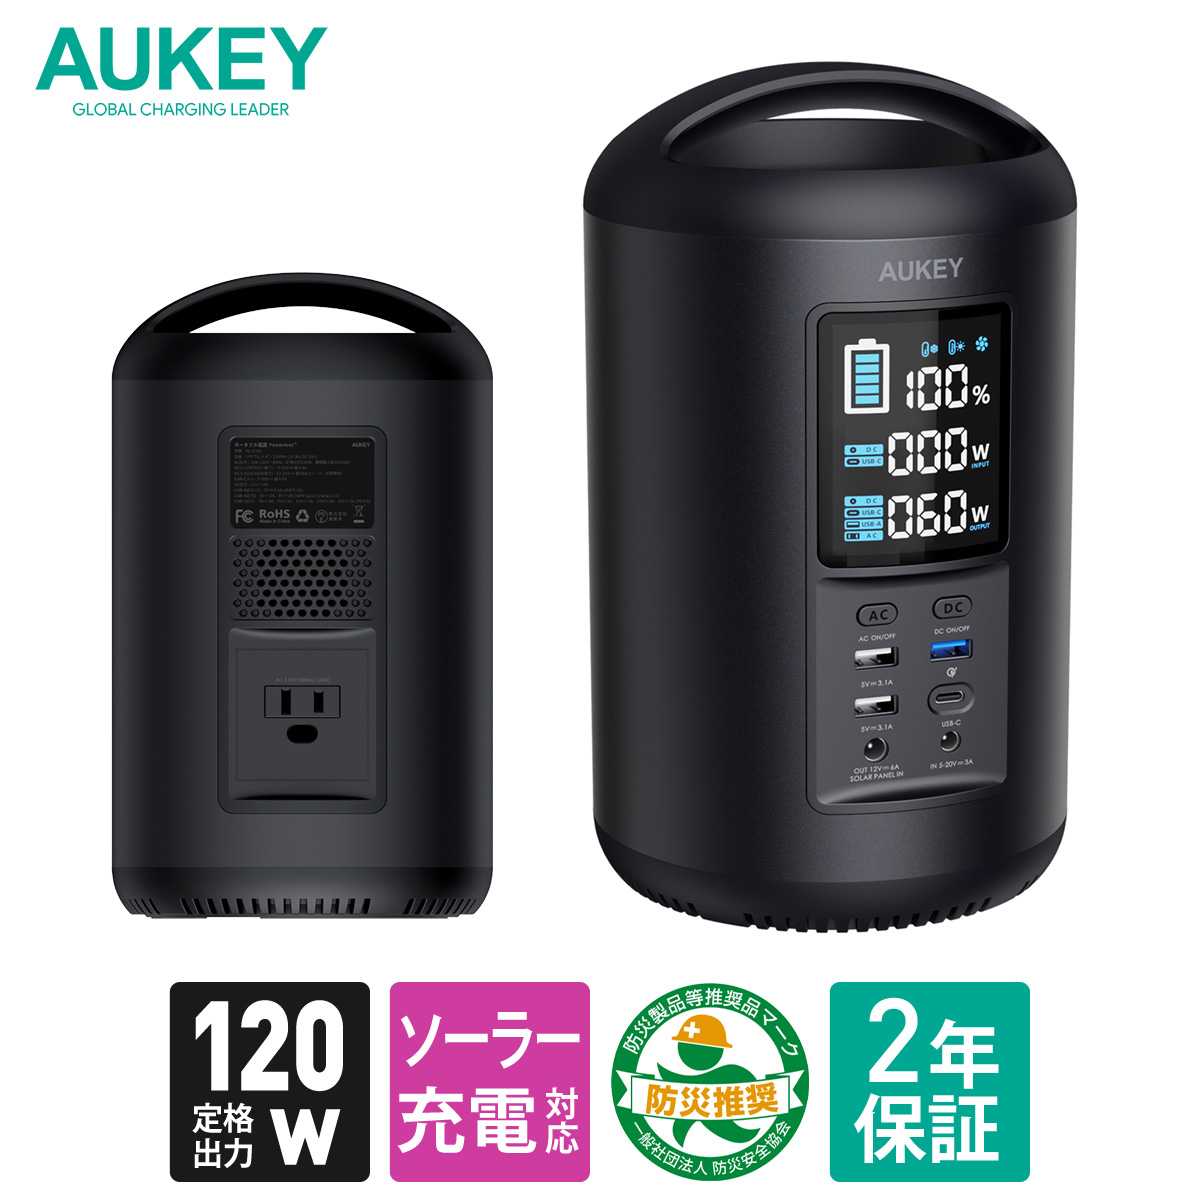 AUKEY 219Wh ポータブル電源 PS-ST02